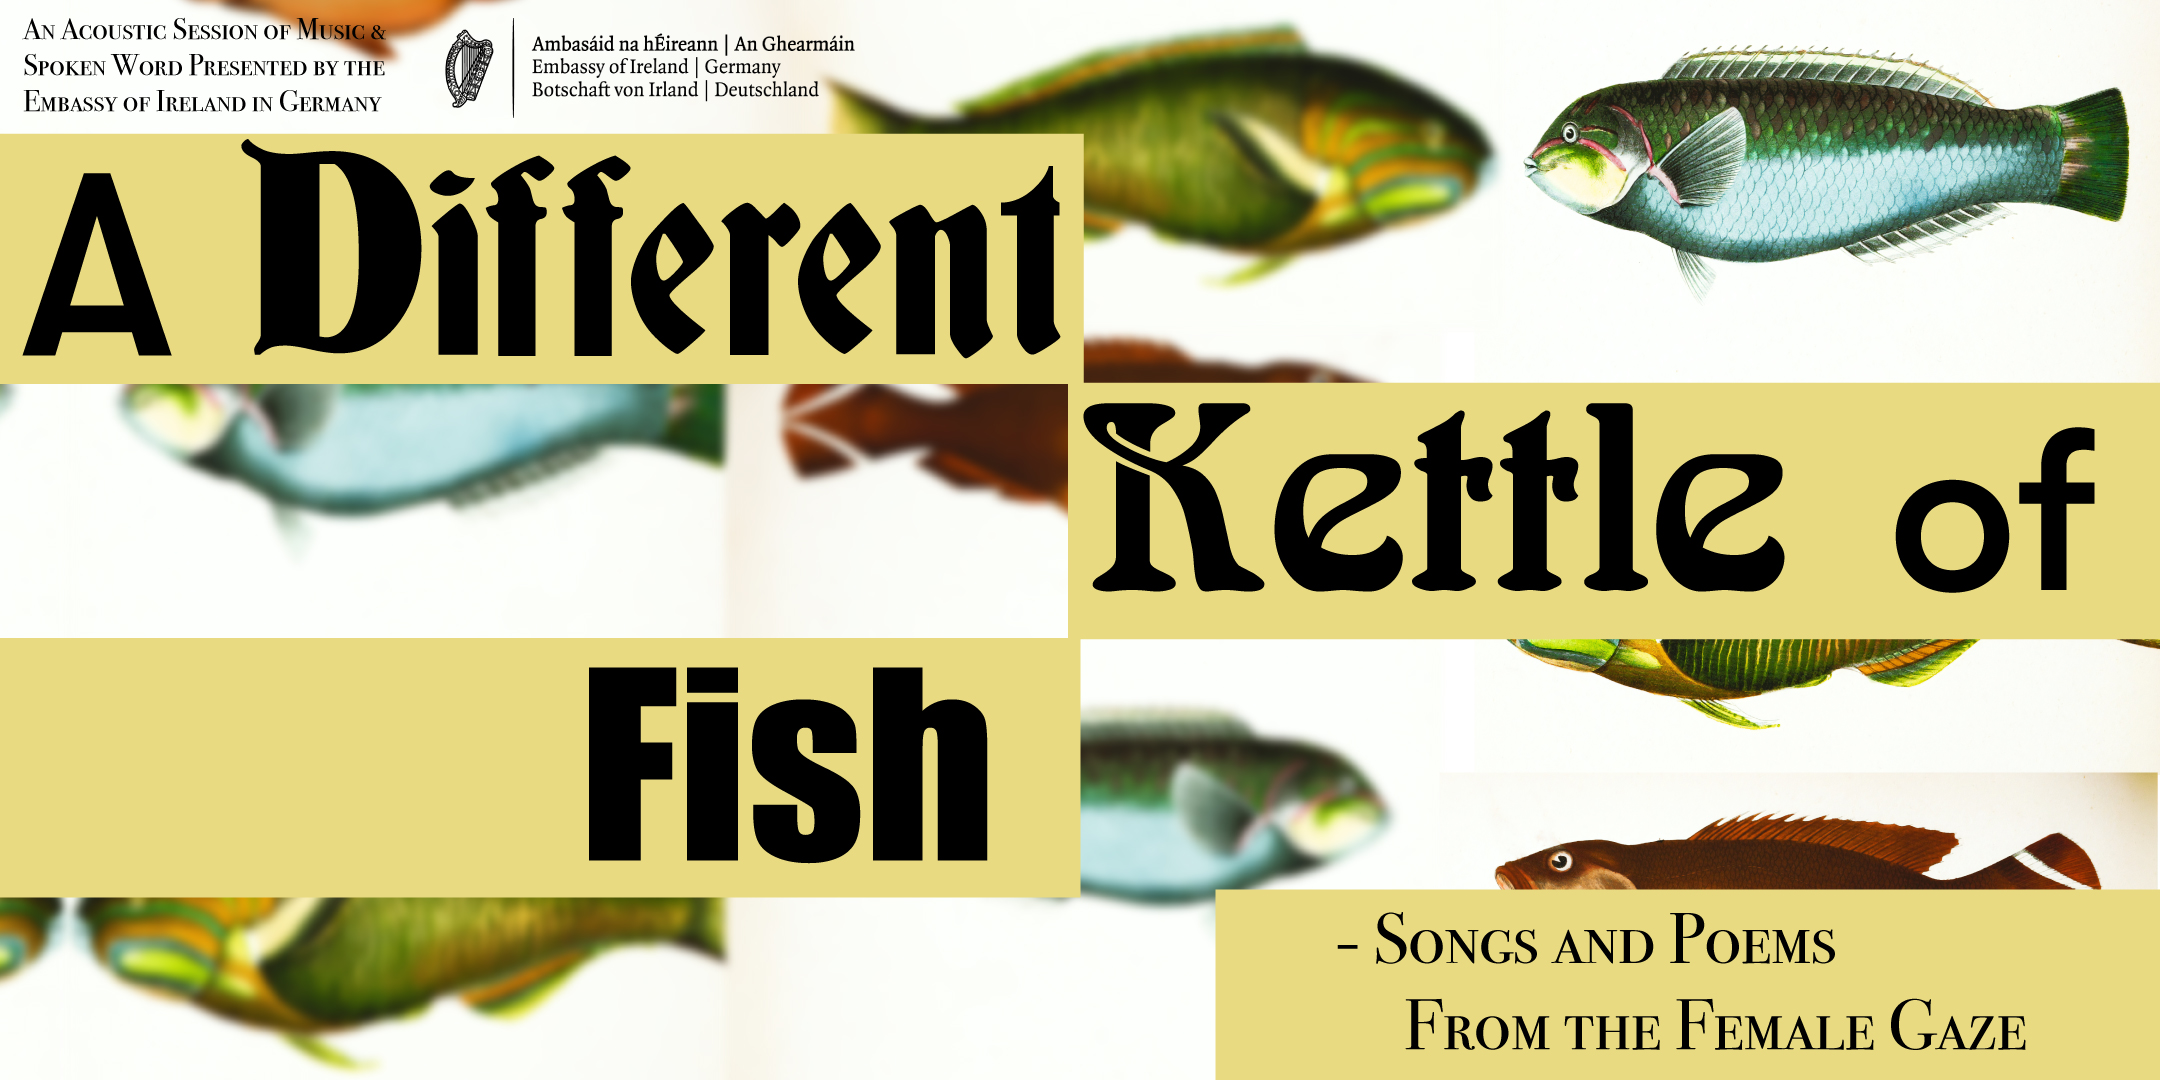 A Different Kettle of Fish - Songs and Poems from the Female Gaze, 22 Feb, Loophole, Boddinstraße